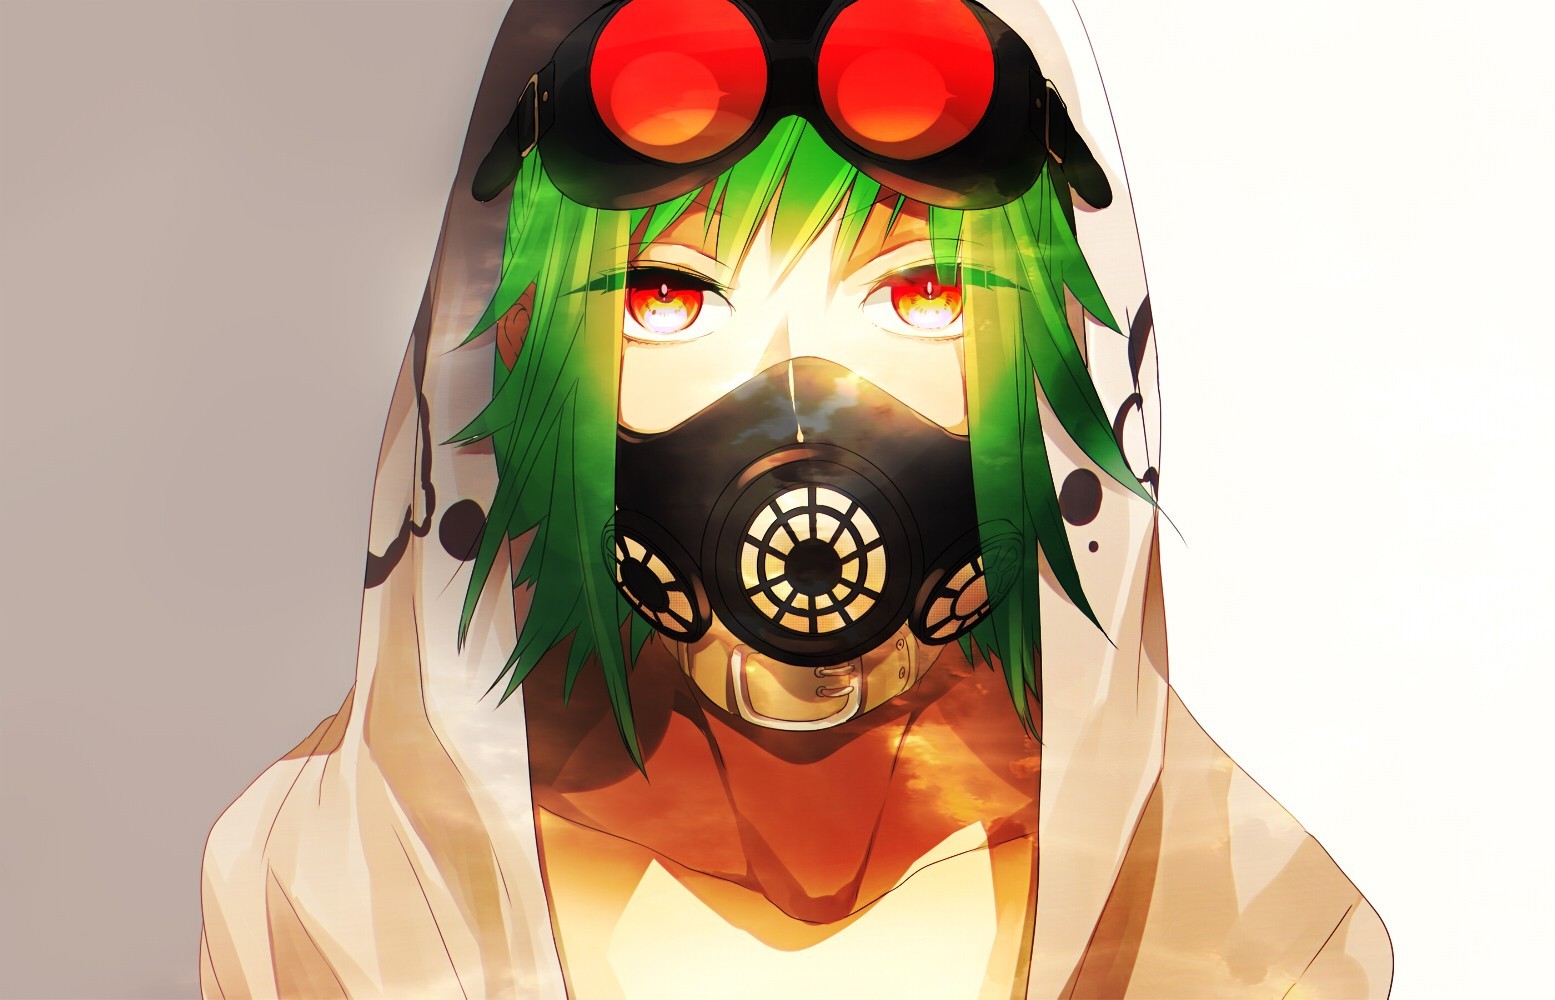 Anime 1555x1000 anime Vocaloid Megpoid Gumi gas masks goggles anime girls glowing eyes green hair face simple background red eyes